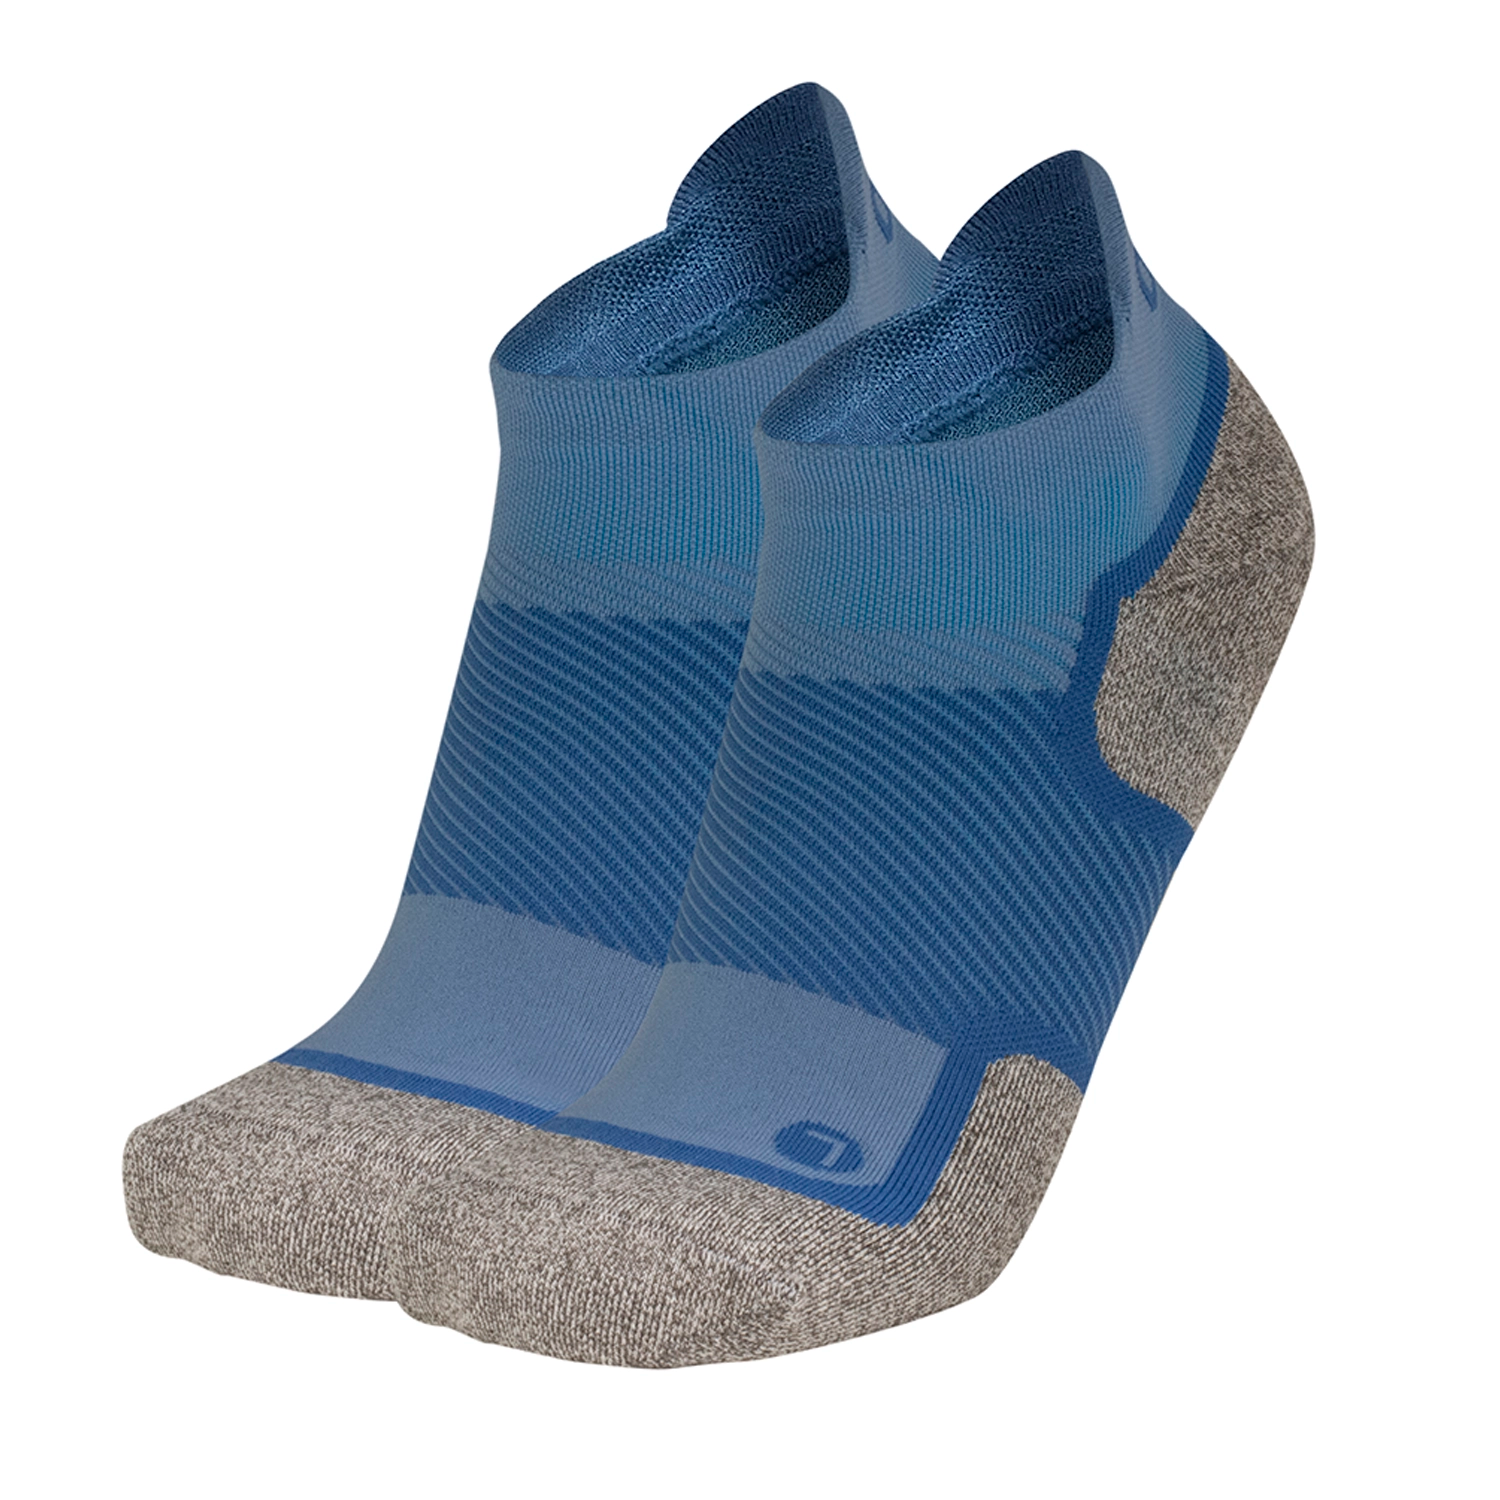 WP4 Wellness sock no show length in steel blue | OS1st